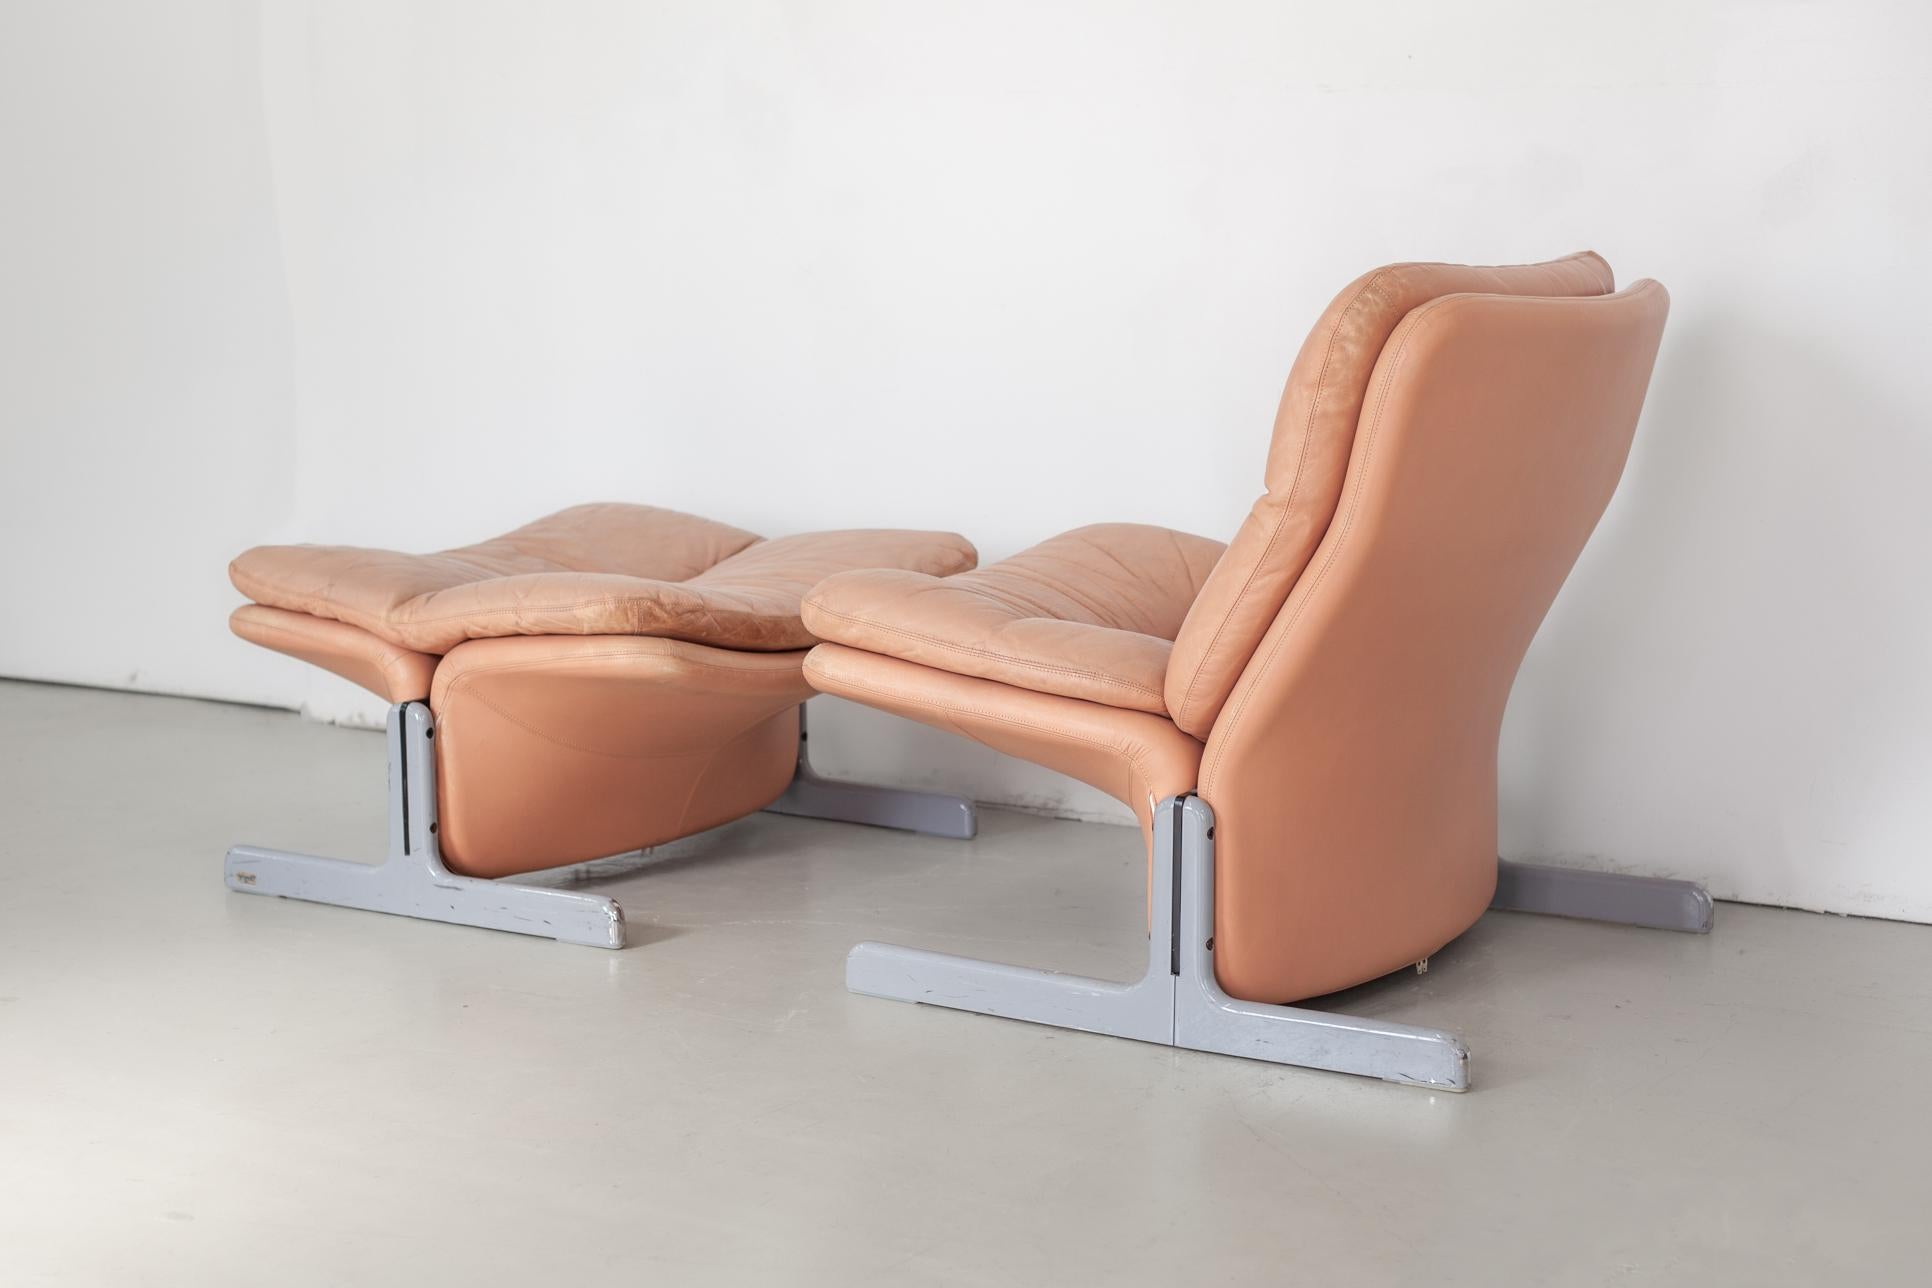 1970s Sandwich chair with ottoman by Titina Ammanati and Giampiero Vitelli for Brunati. The low profile chair and ottoman feature an upside down T chrome base. The leather seats are plush and extremely comfortable. A wonderful example of 1970s